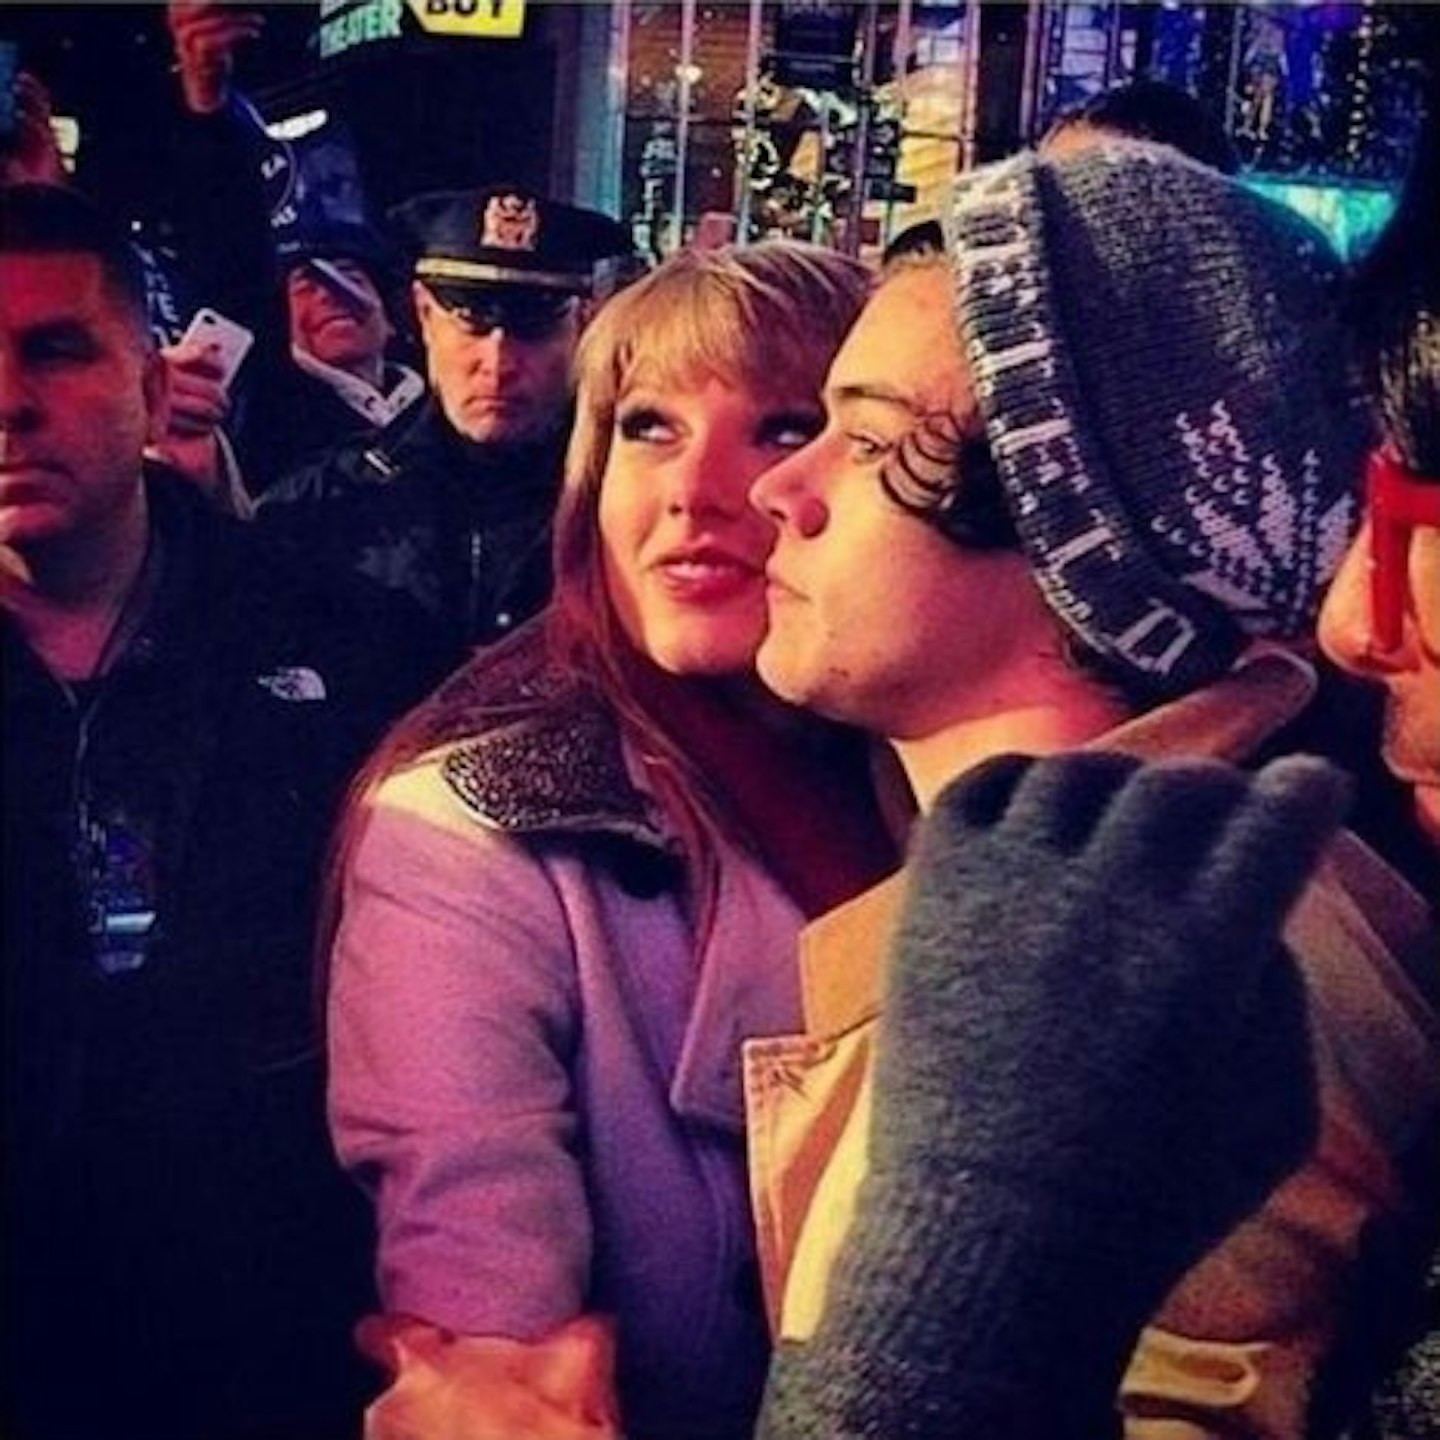 Remember Harry and Taylor short-lived (but seriously intense) relationship?